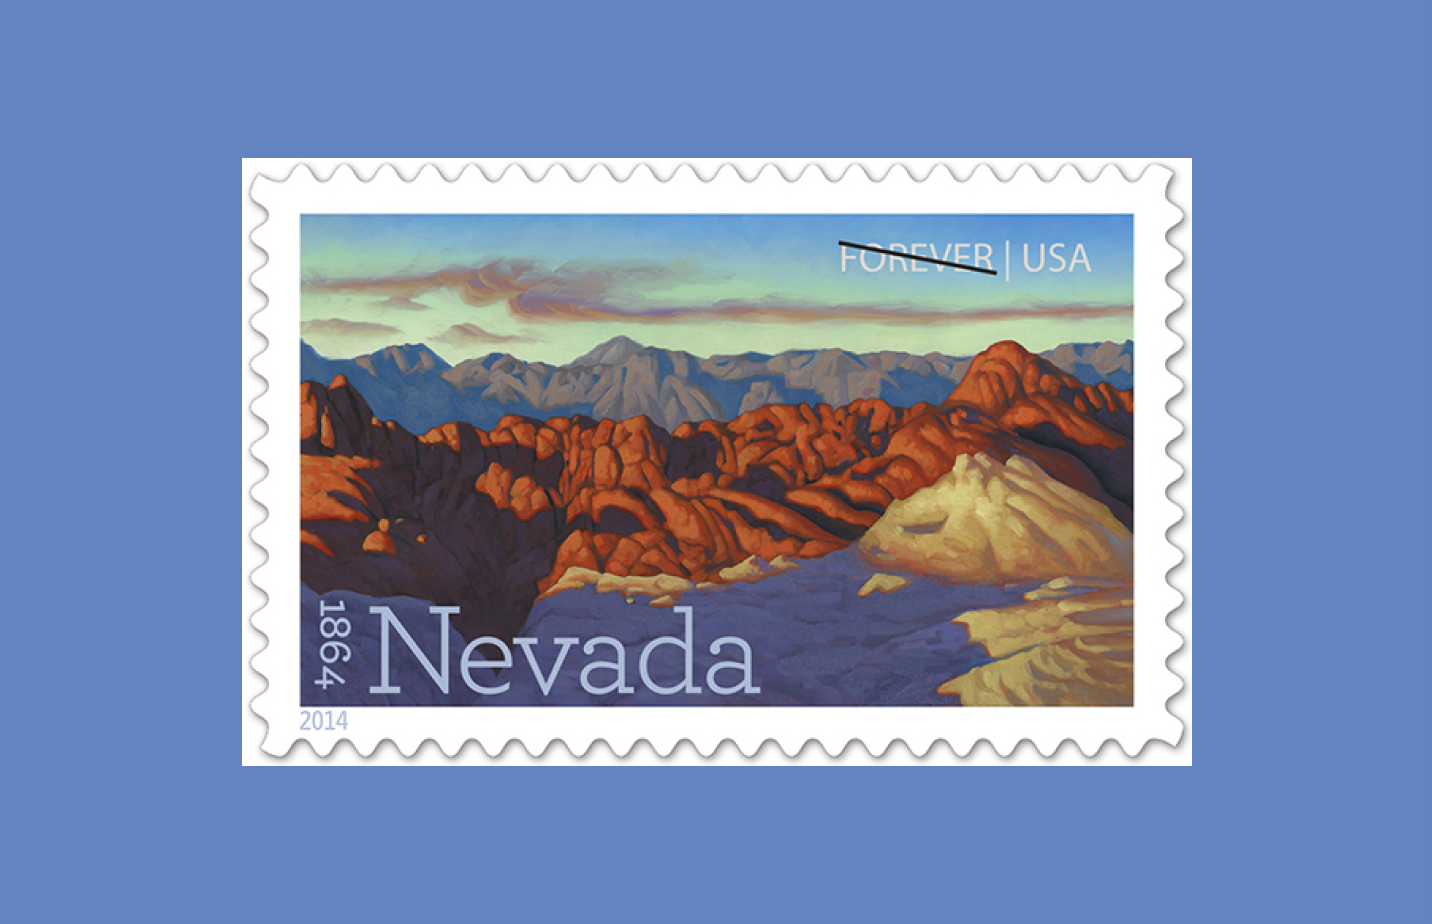 img: stamp by USPS - “Nevada” is in Archer, a slab serif; source: FontsInUse